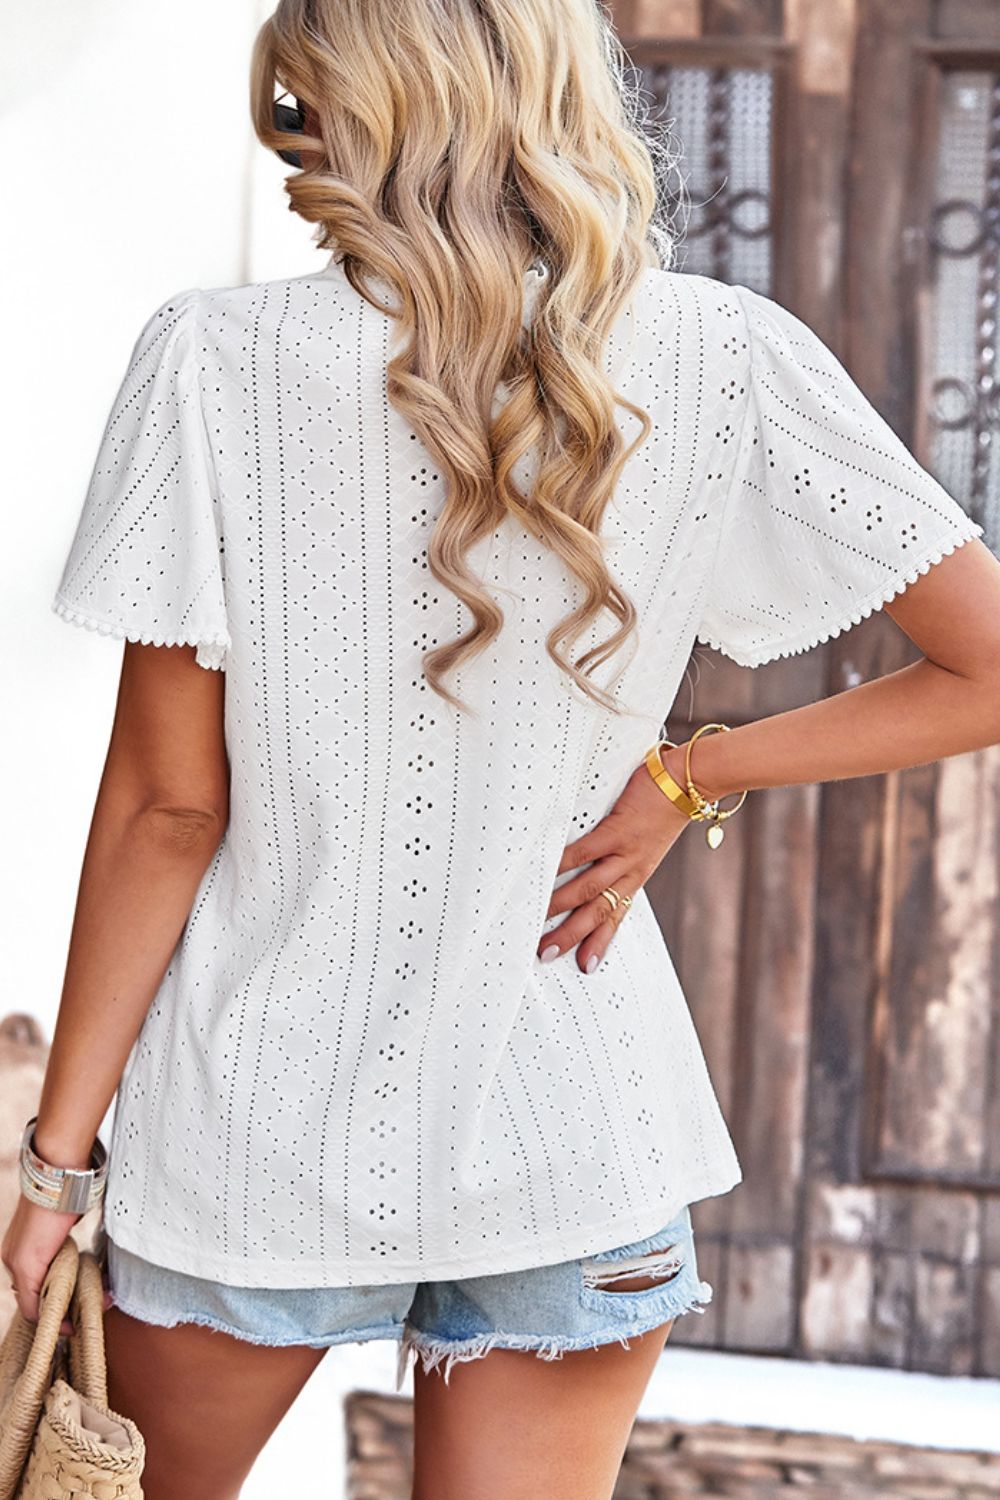 Frill Trim Round Neck Eyelet Puff Sleeve Blouse - Online Only